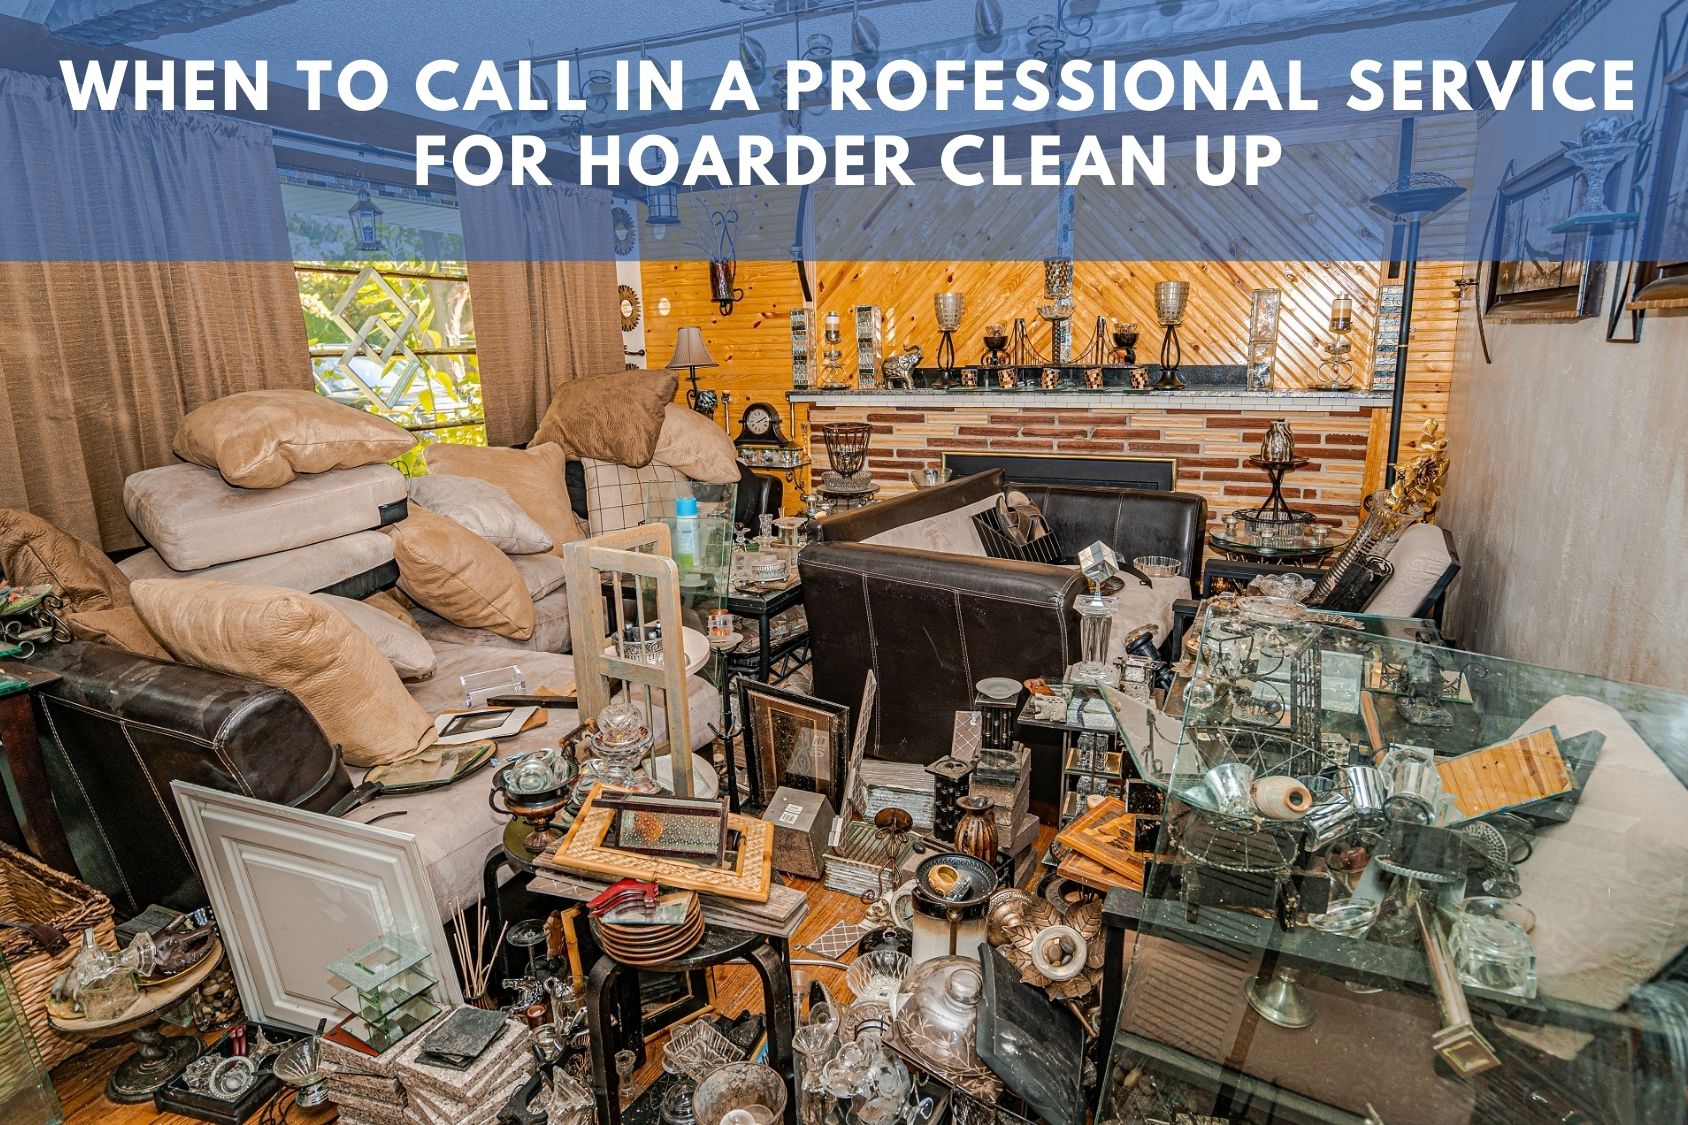 When to Call in a Professional Service for Hoarder Clean Up